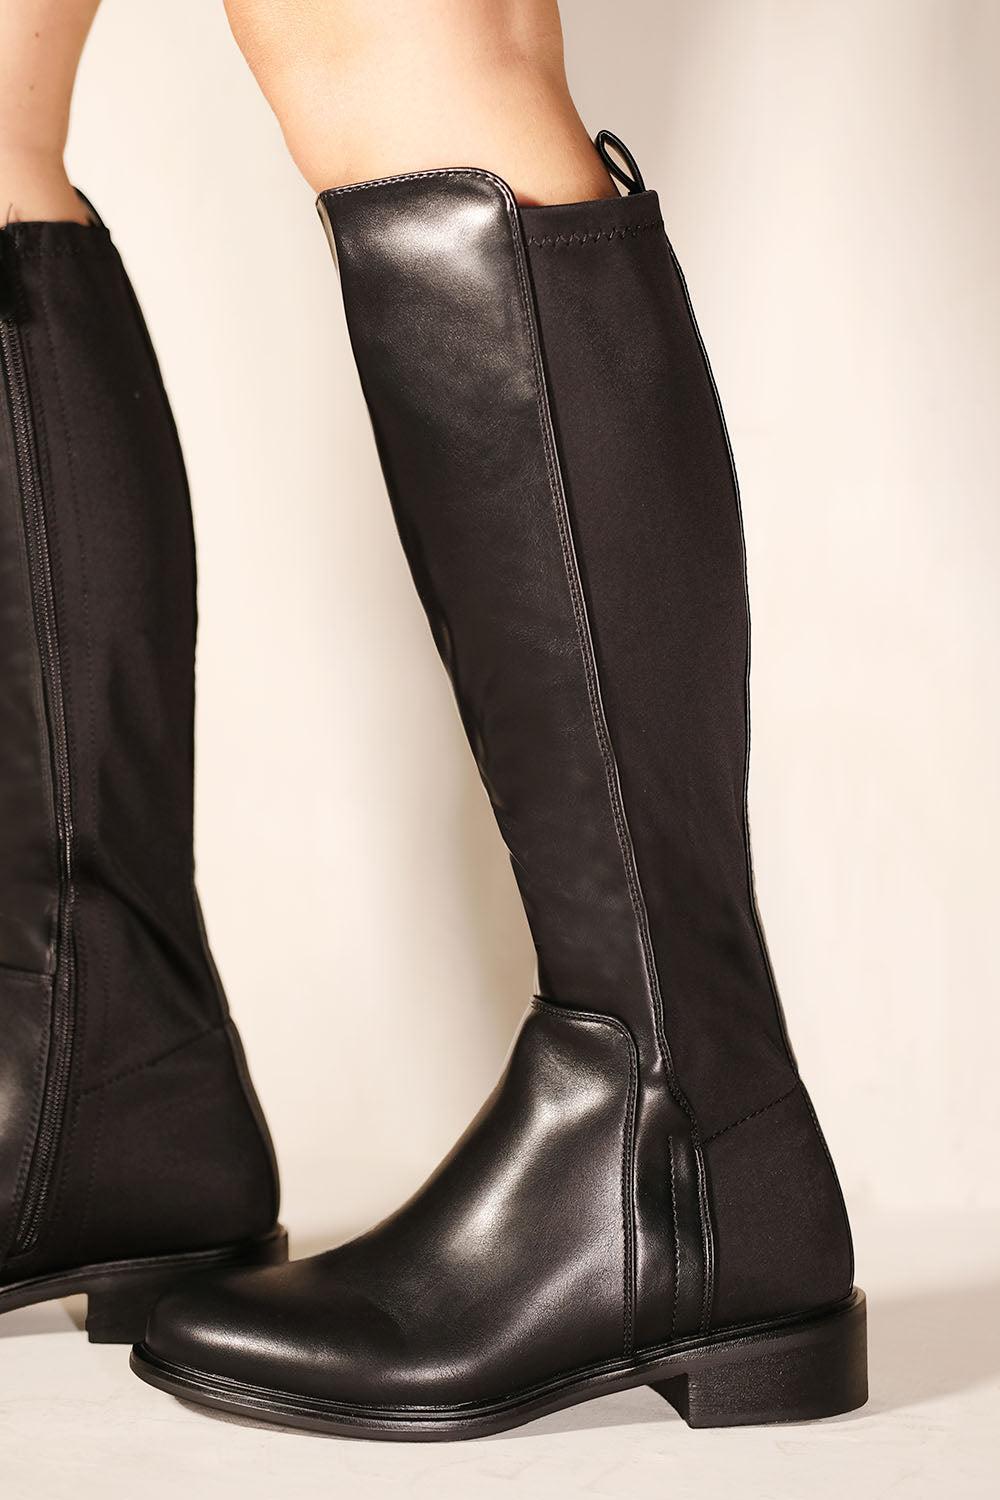 Where's That From Parker Knee High Boots With Side Zip in Black | Lyst